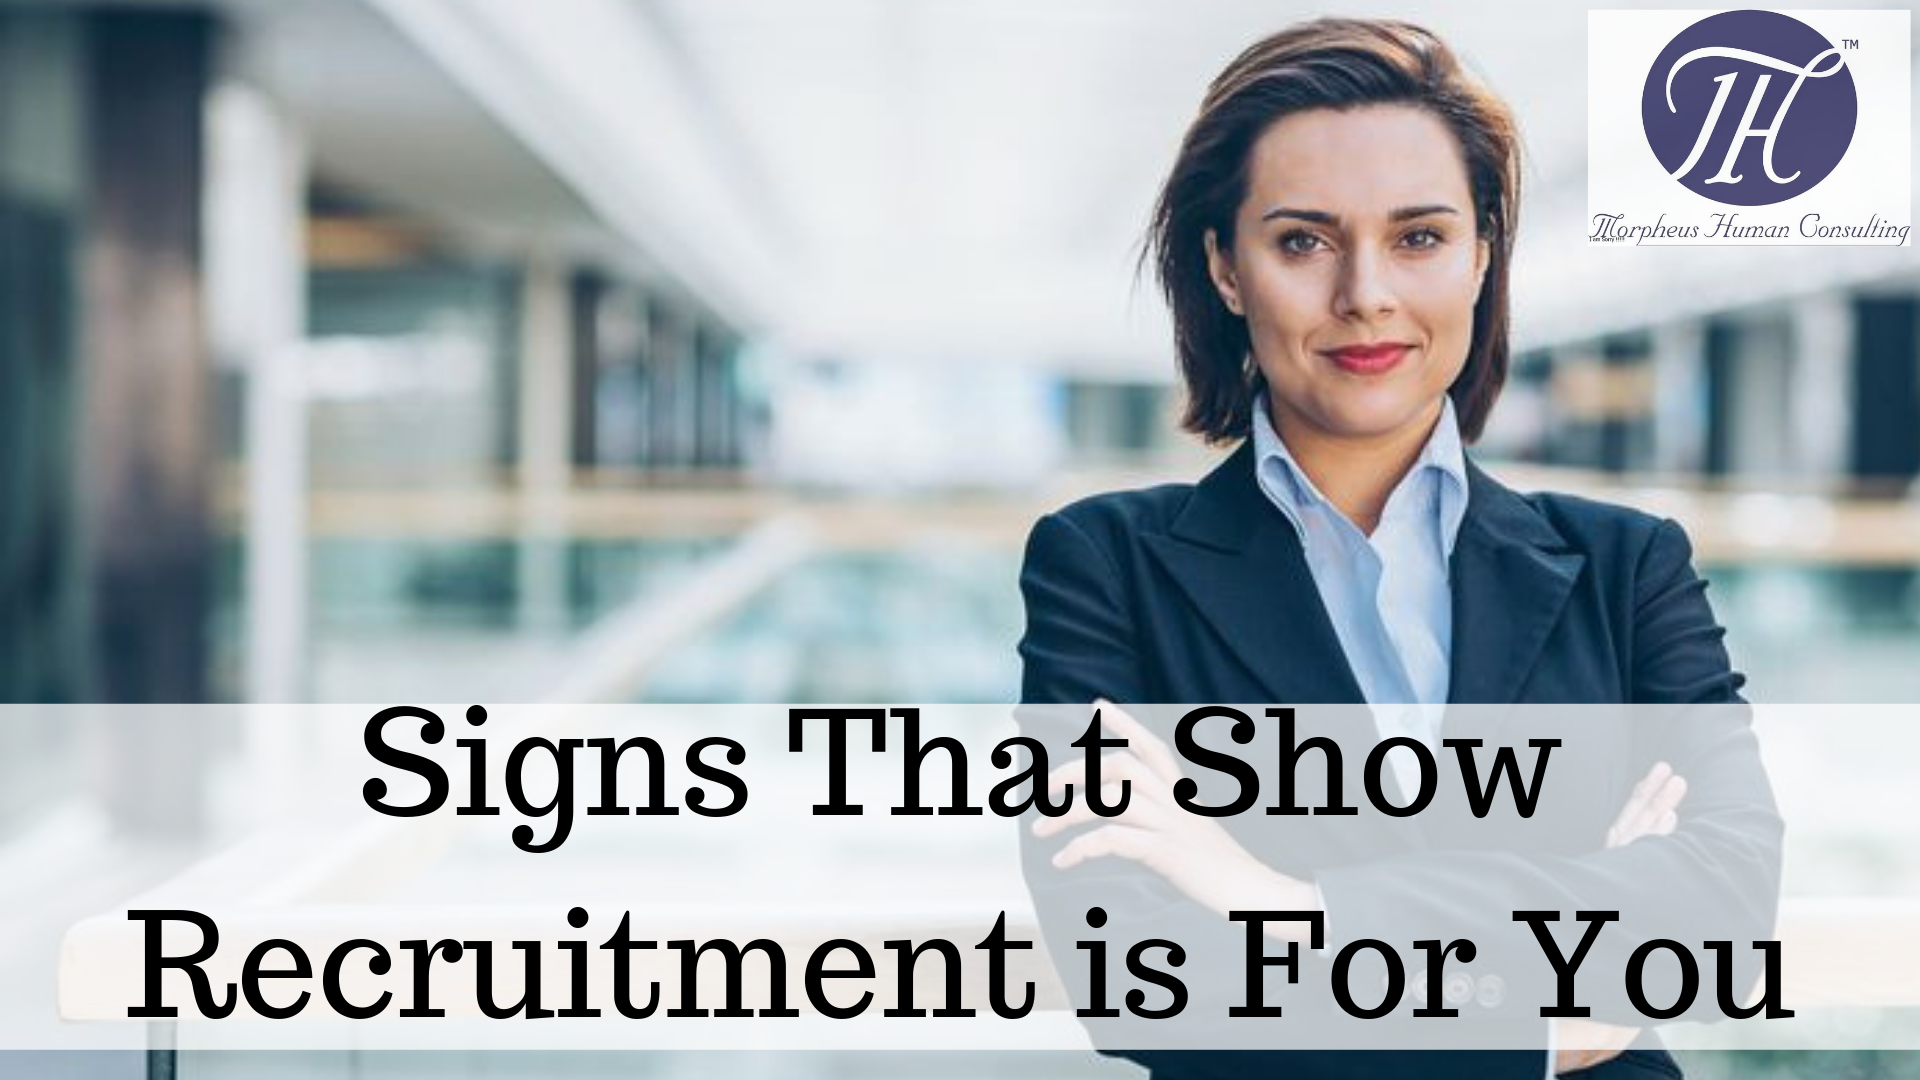  Signs that show Recruitment is for you